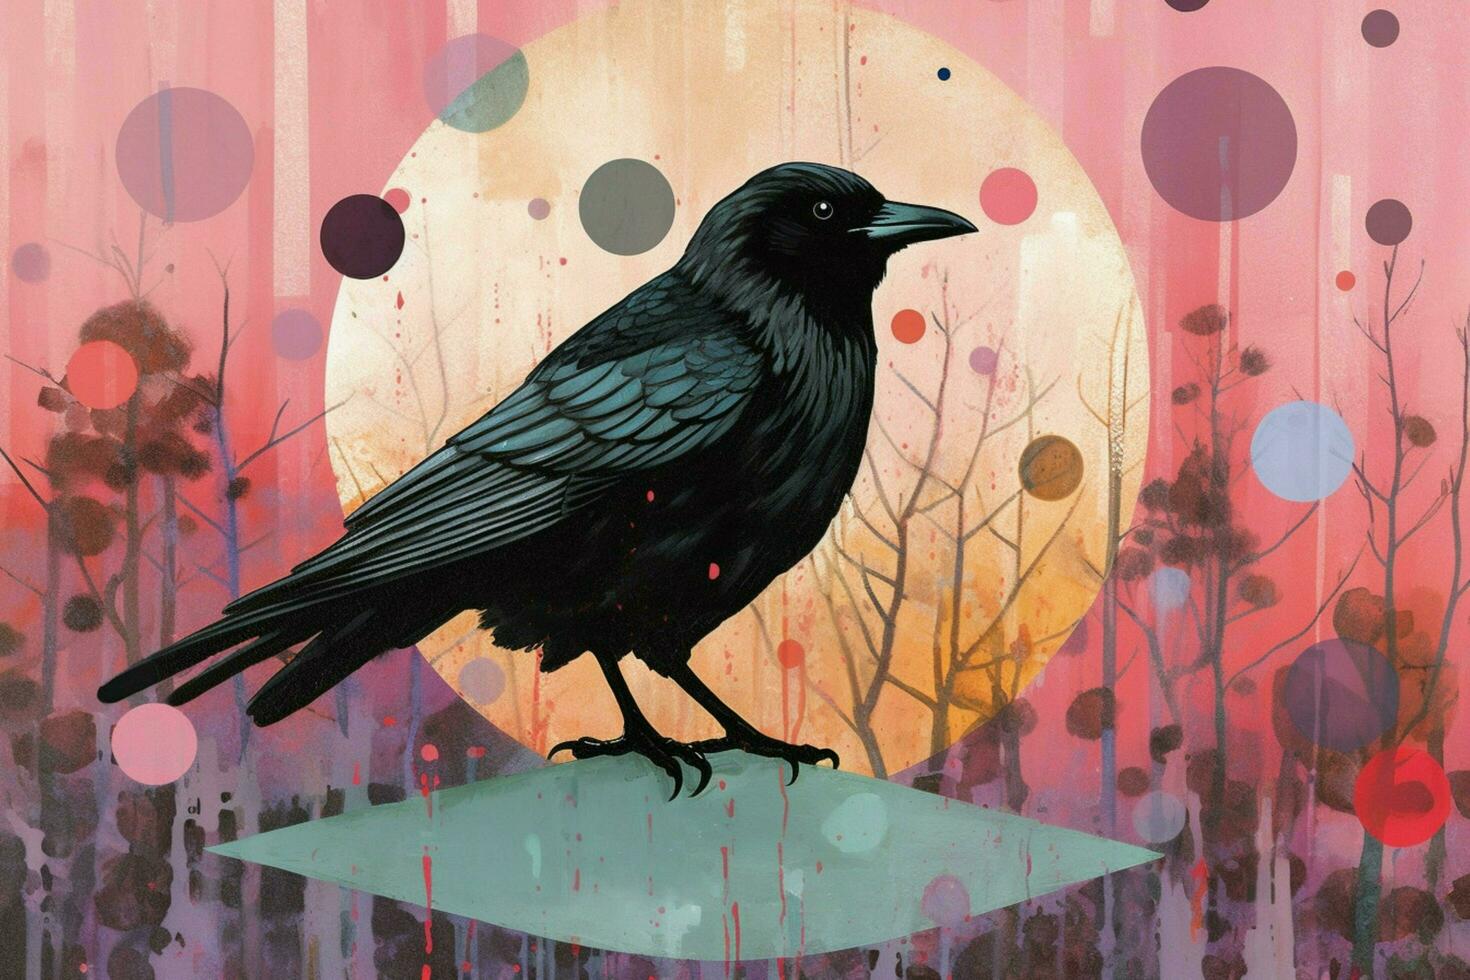 a colorful illustration of a crow with a black co photo